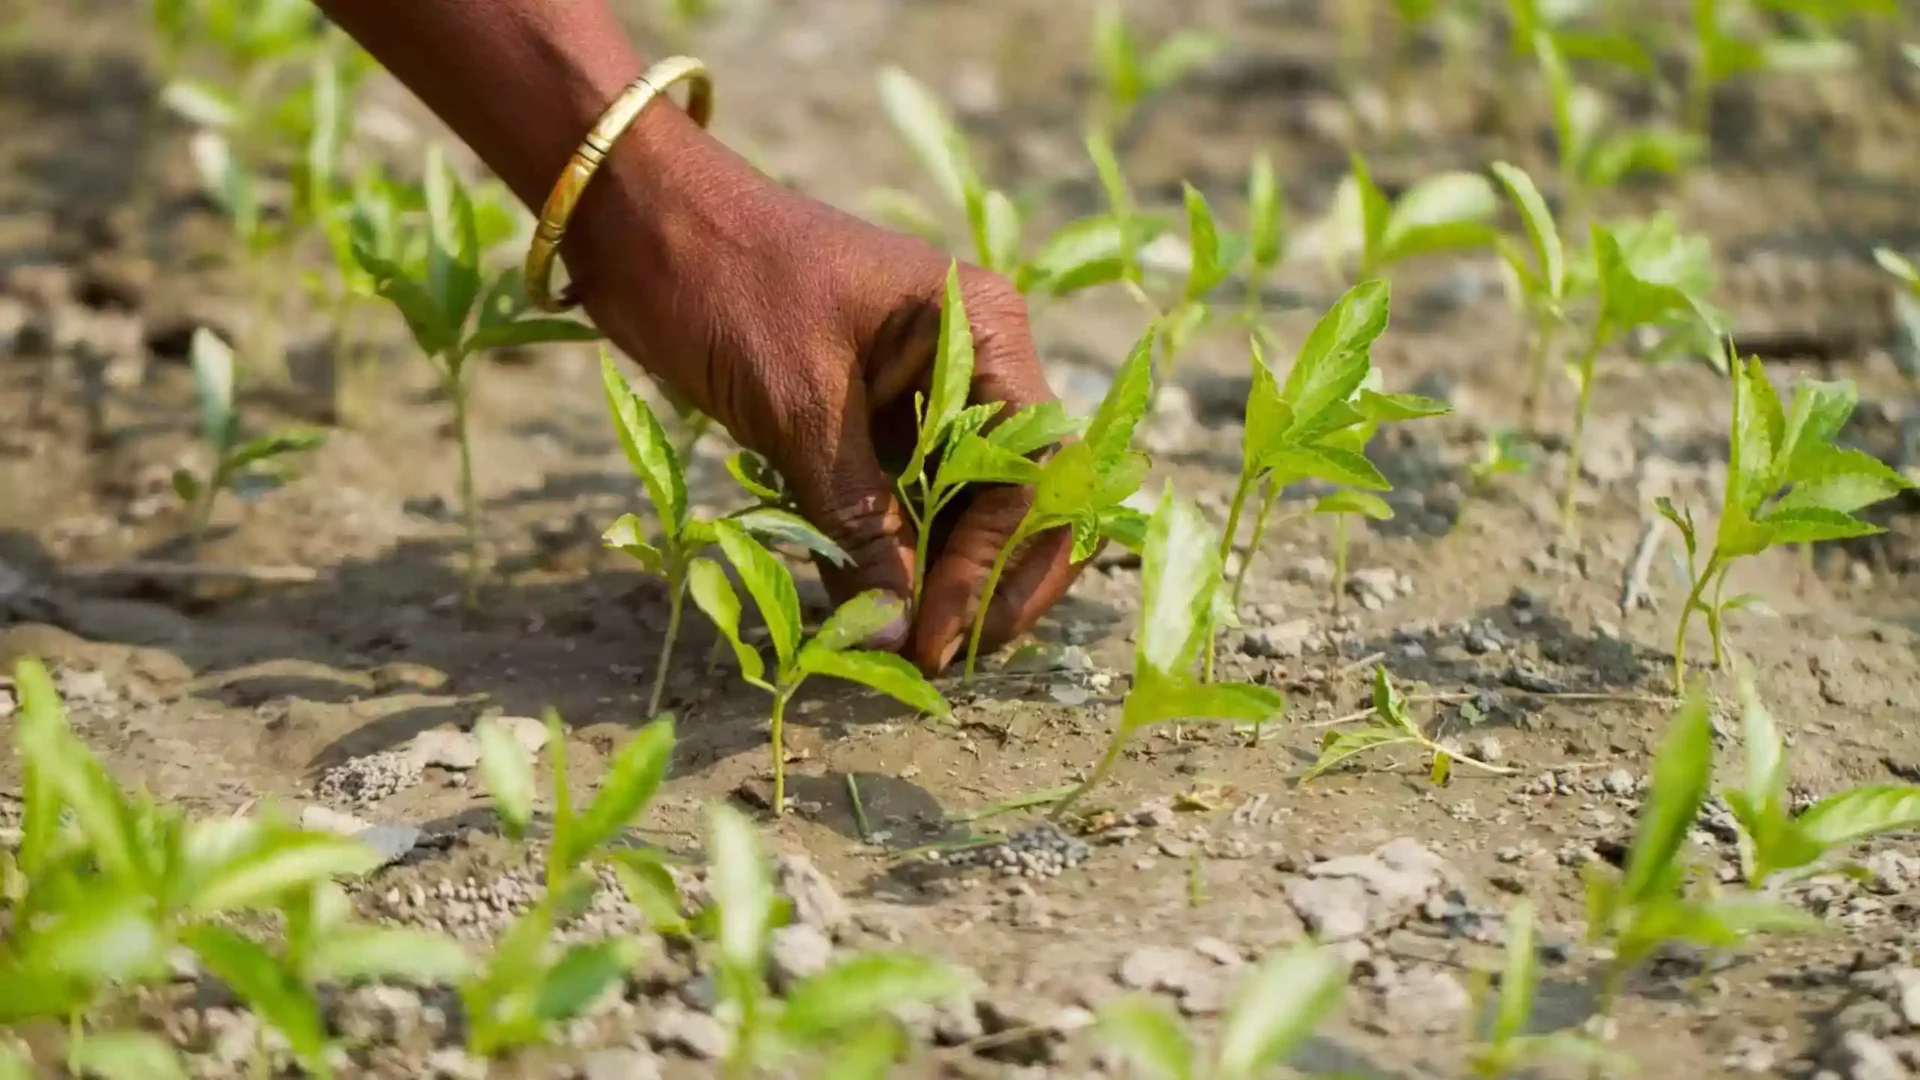 Envisioning a Data-driven Agriculture in Bangladesh